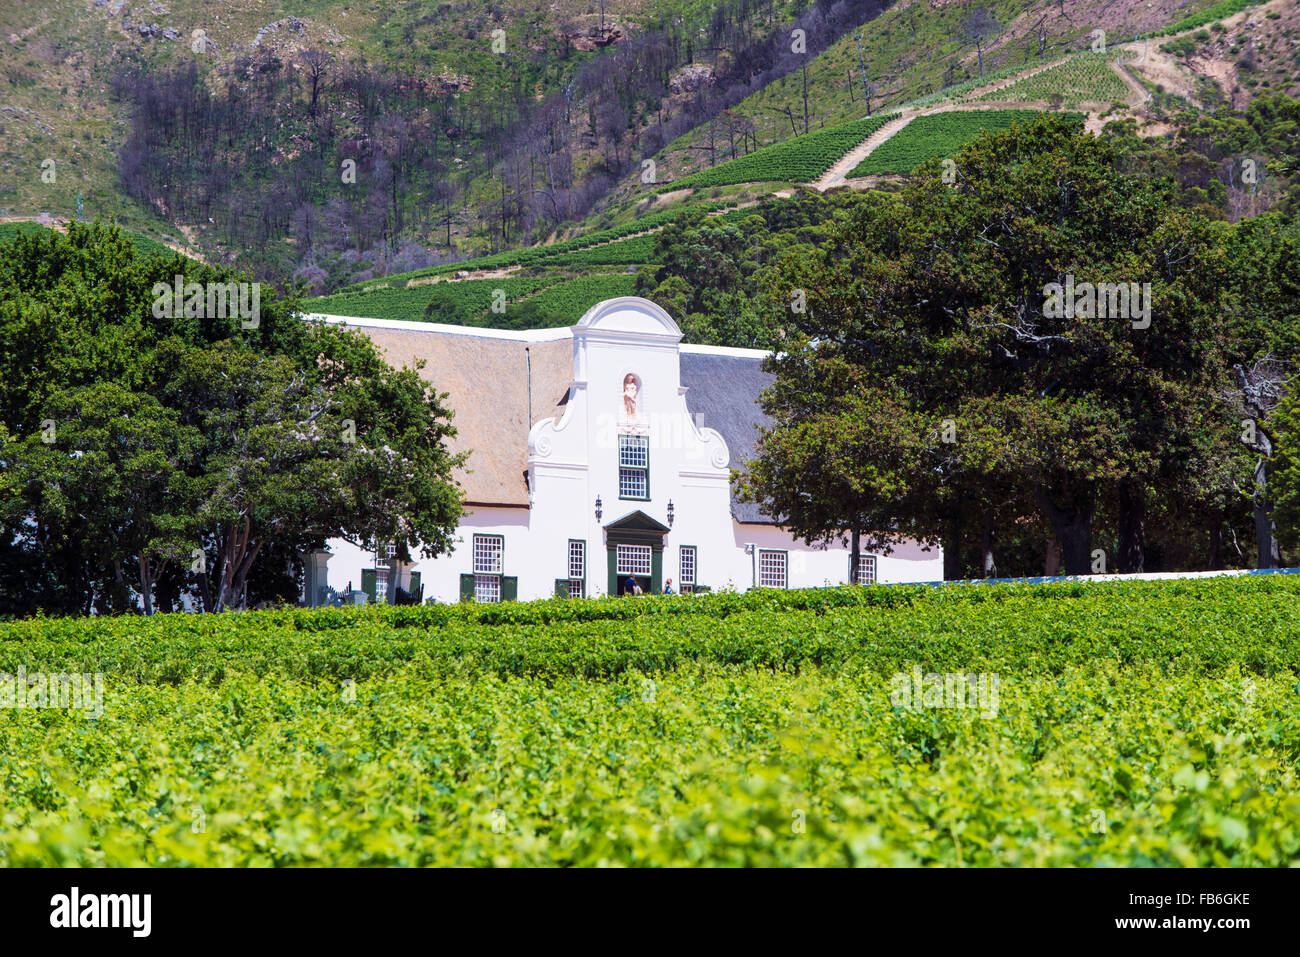 The main manor house and vineyards of Groot Constantia in Cape Town, South Africa Stock Photo